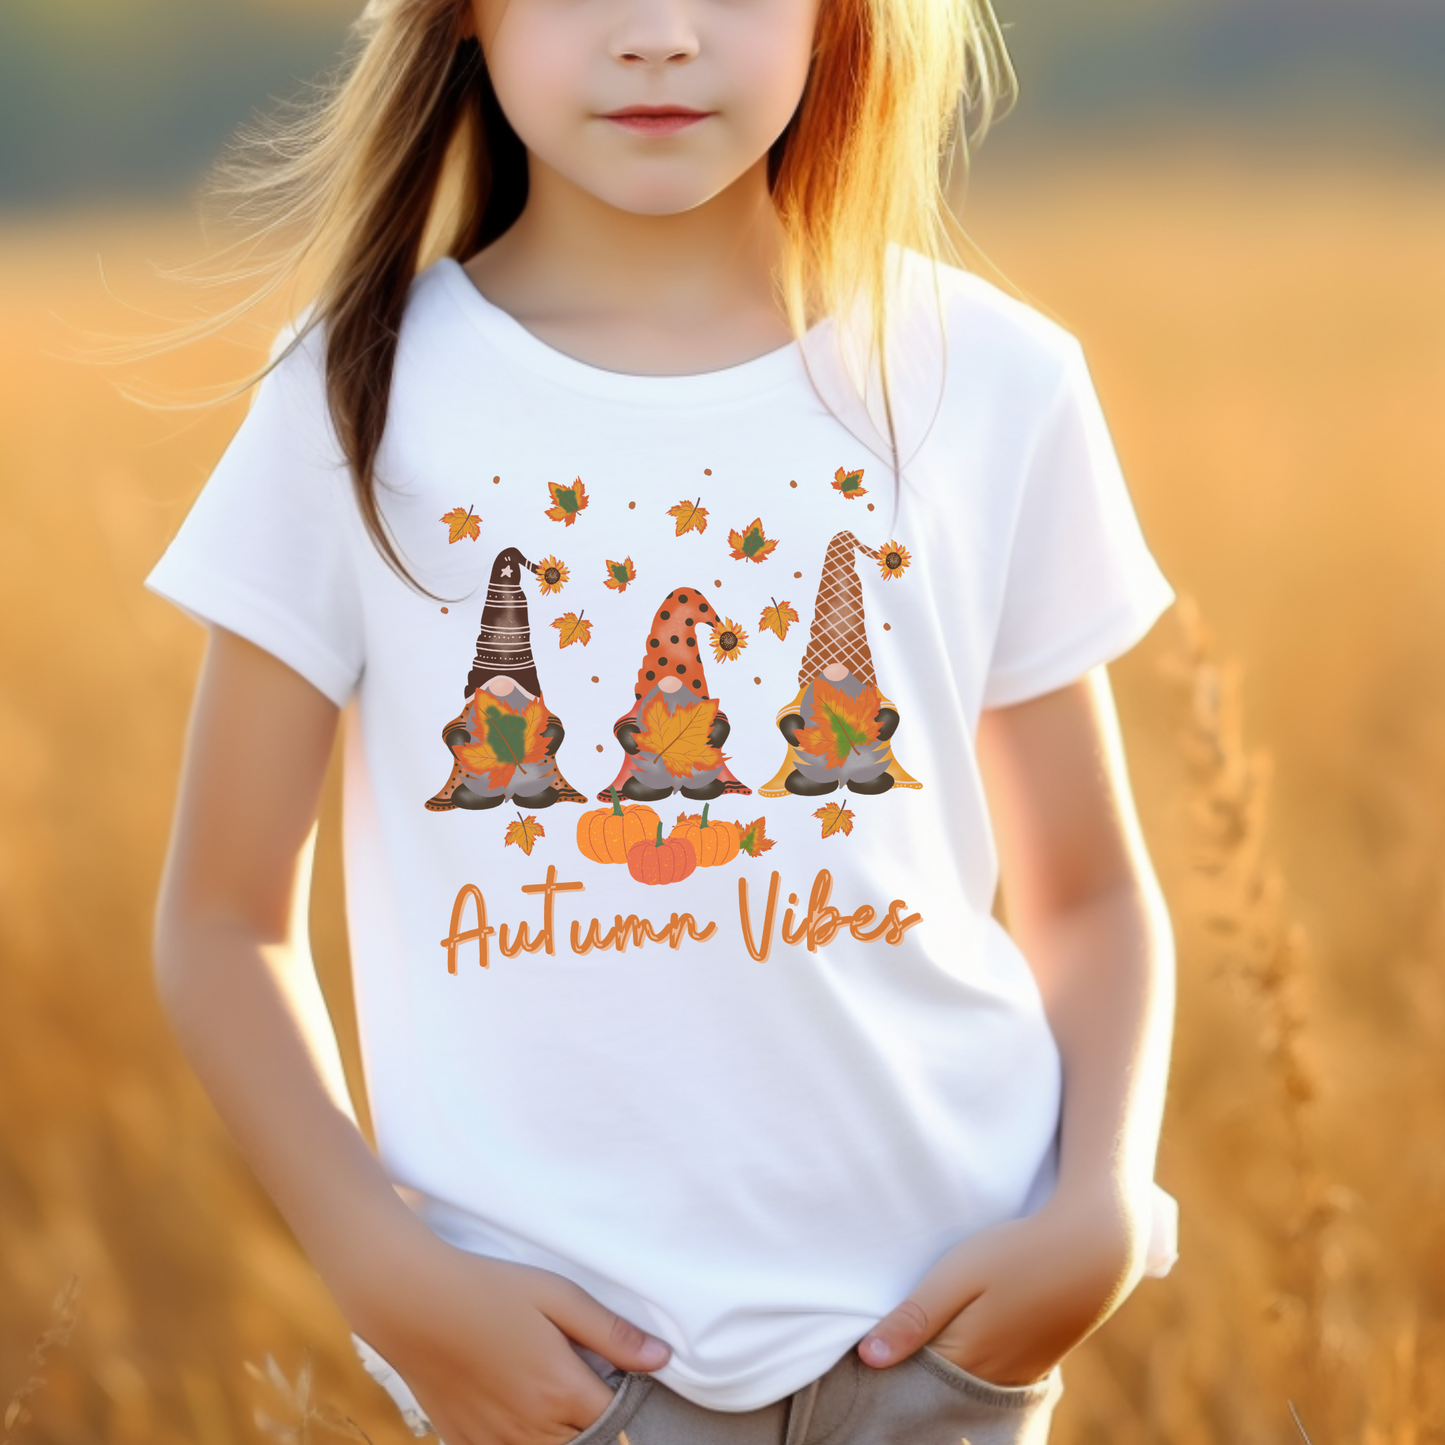 Little girl wearing a white t-shirt with printed autumn gonks and the words "autumn vibes"